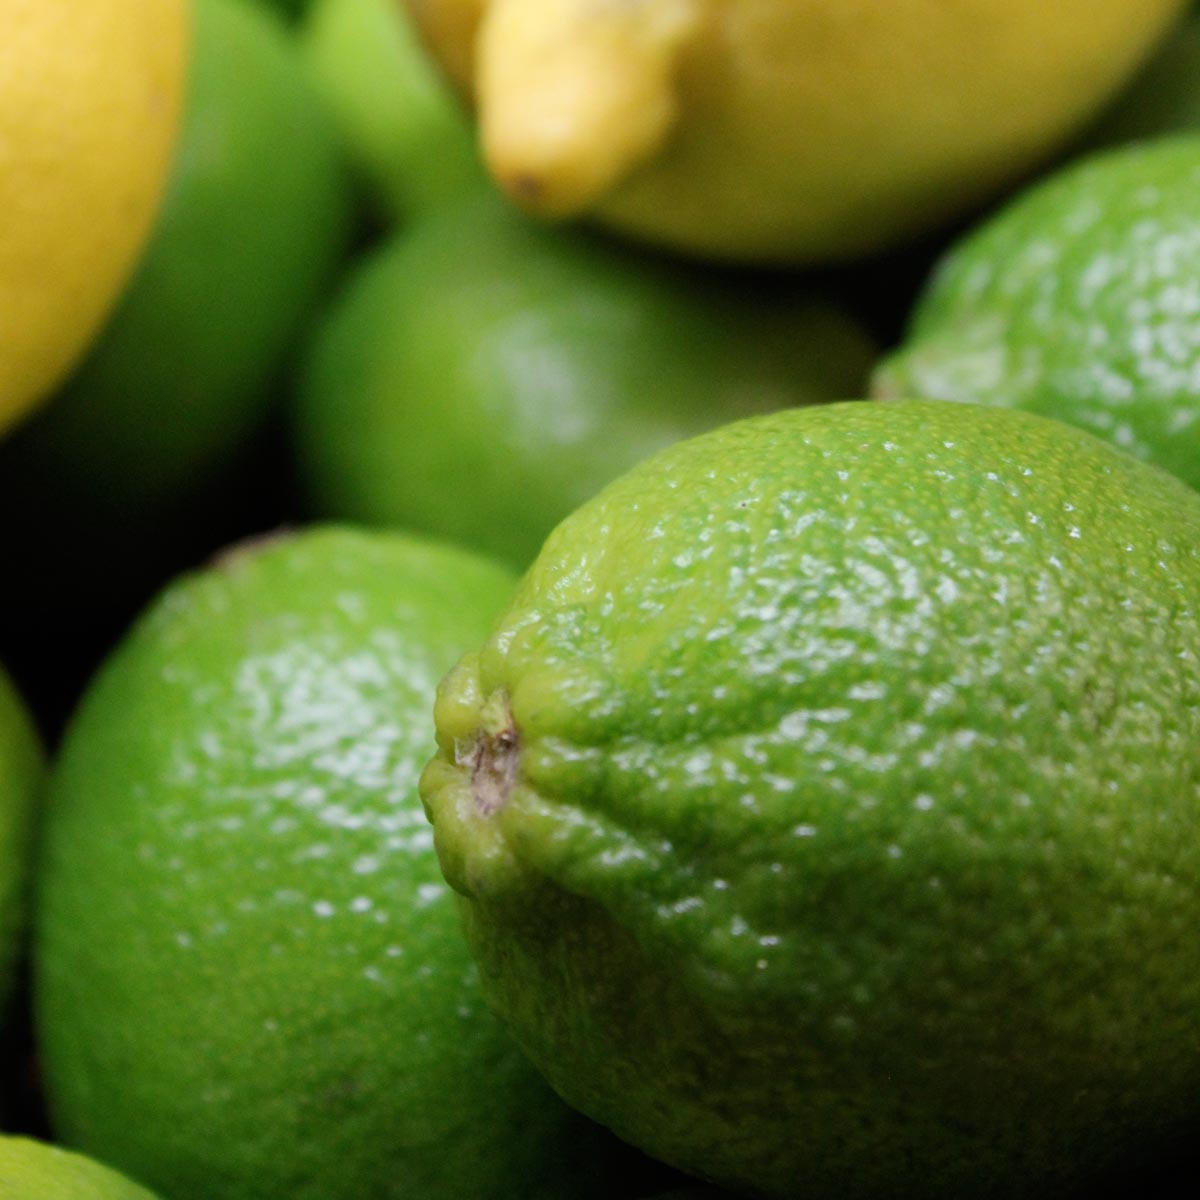 Large sized Limes x 5 - The Northampton Grocer